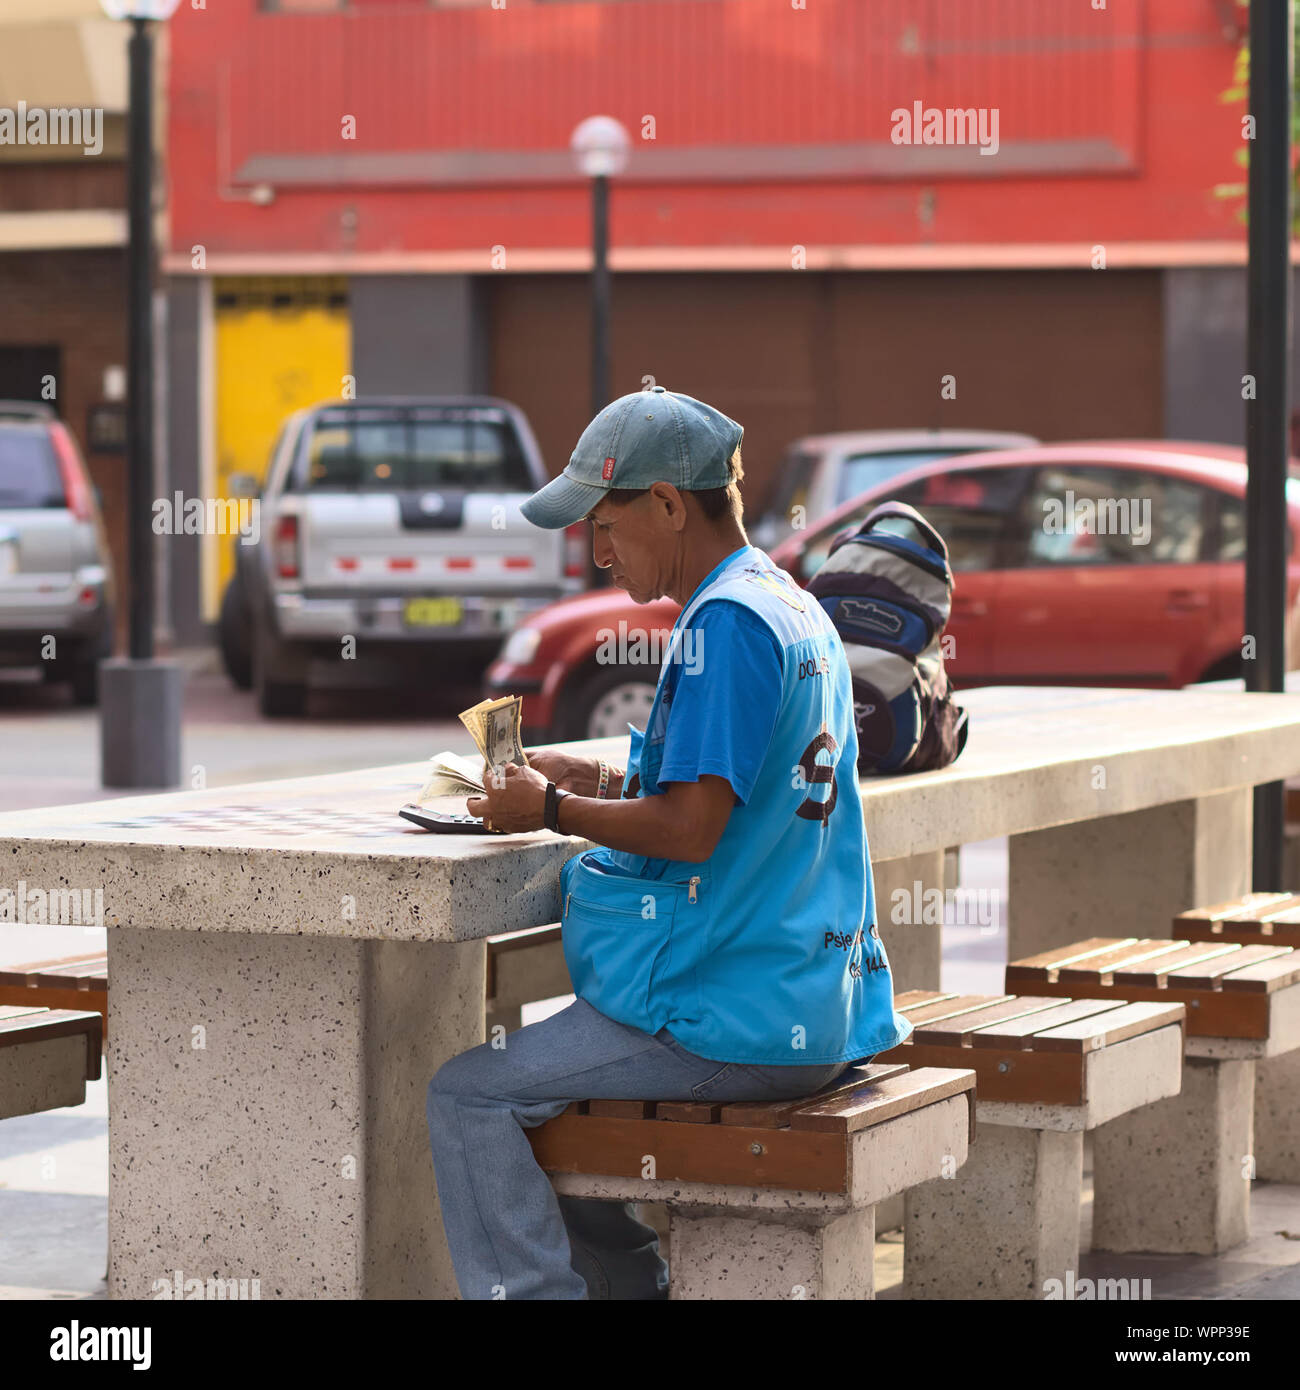 LIMA, PERU - MARCH 5, 2012: Unidentified street money exchanger counting dollar bills at an outdoor table in Miraflores on March 5, 2012 in Lima, Peru Stock Photo